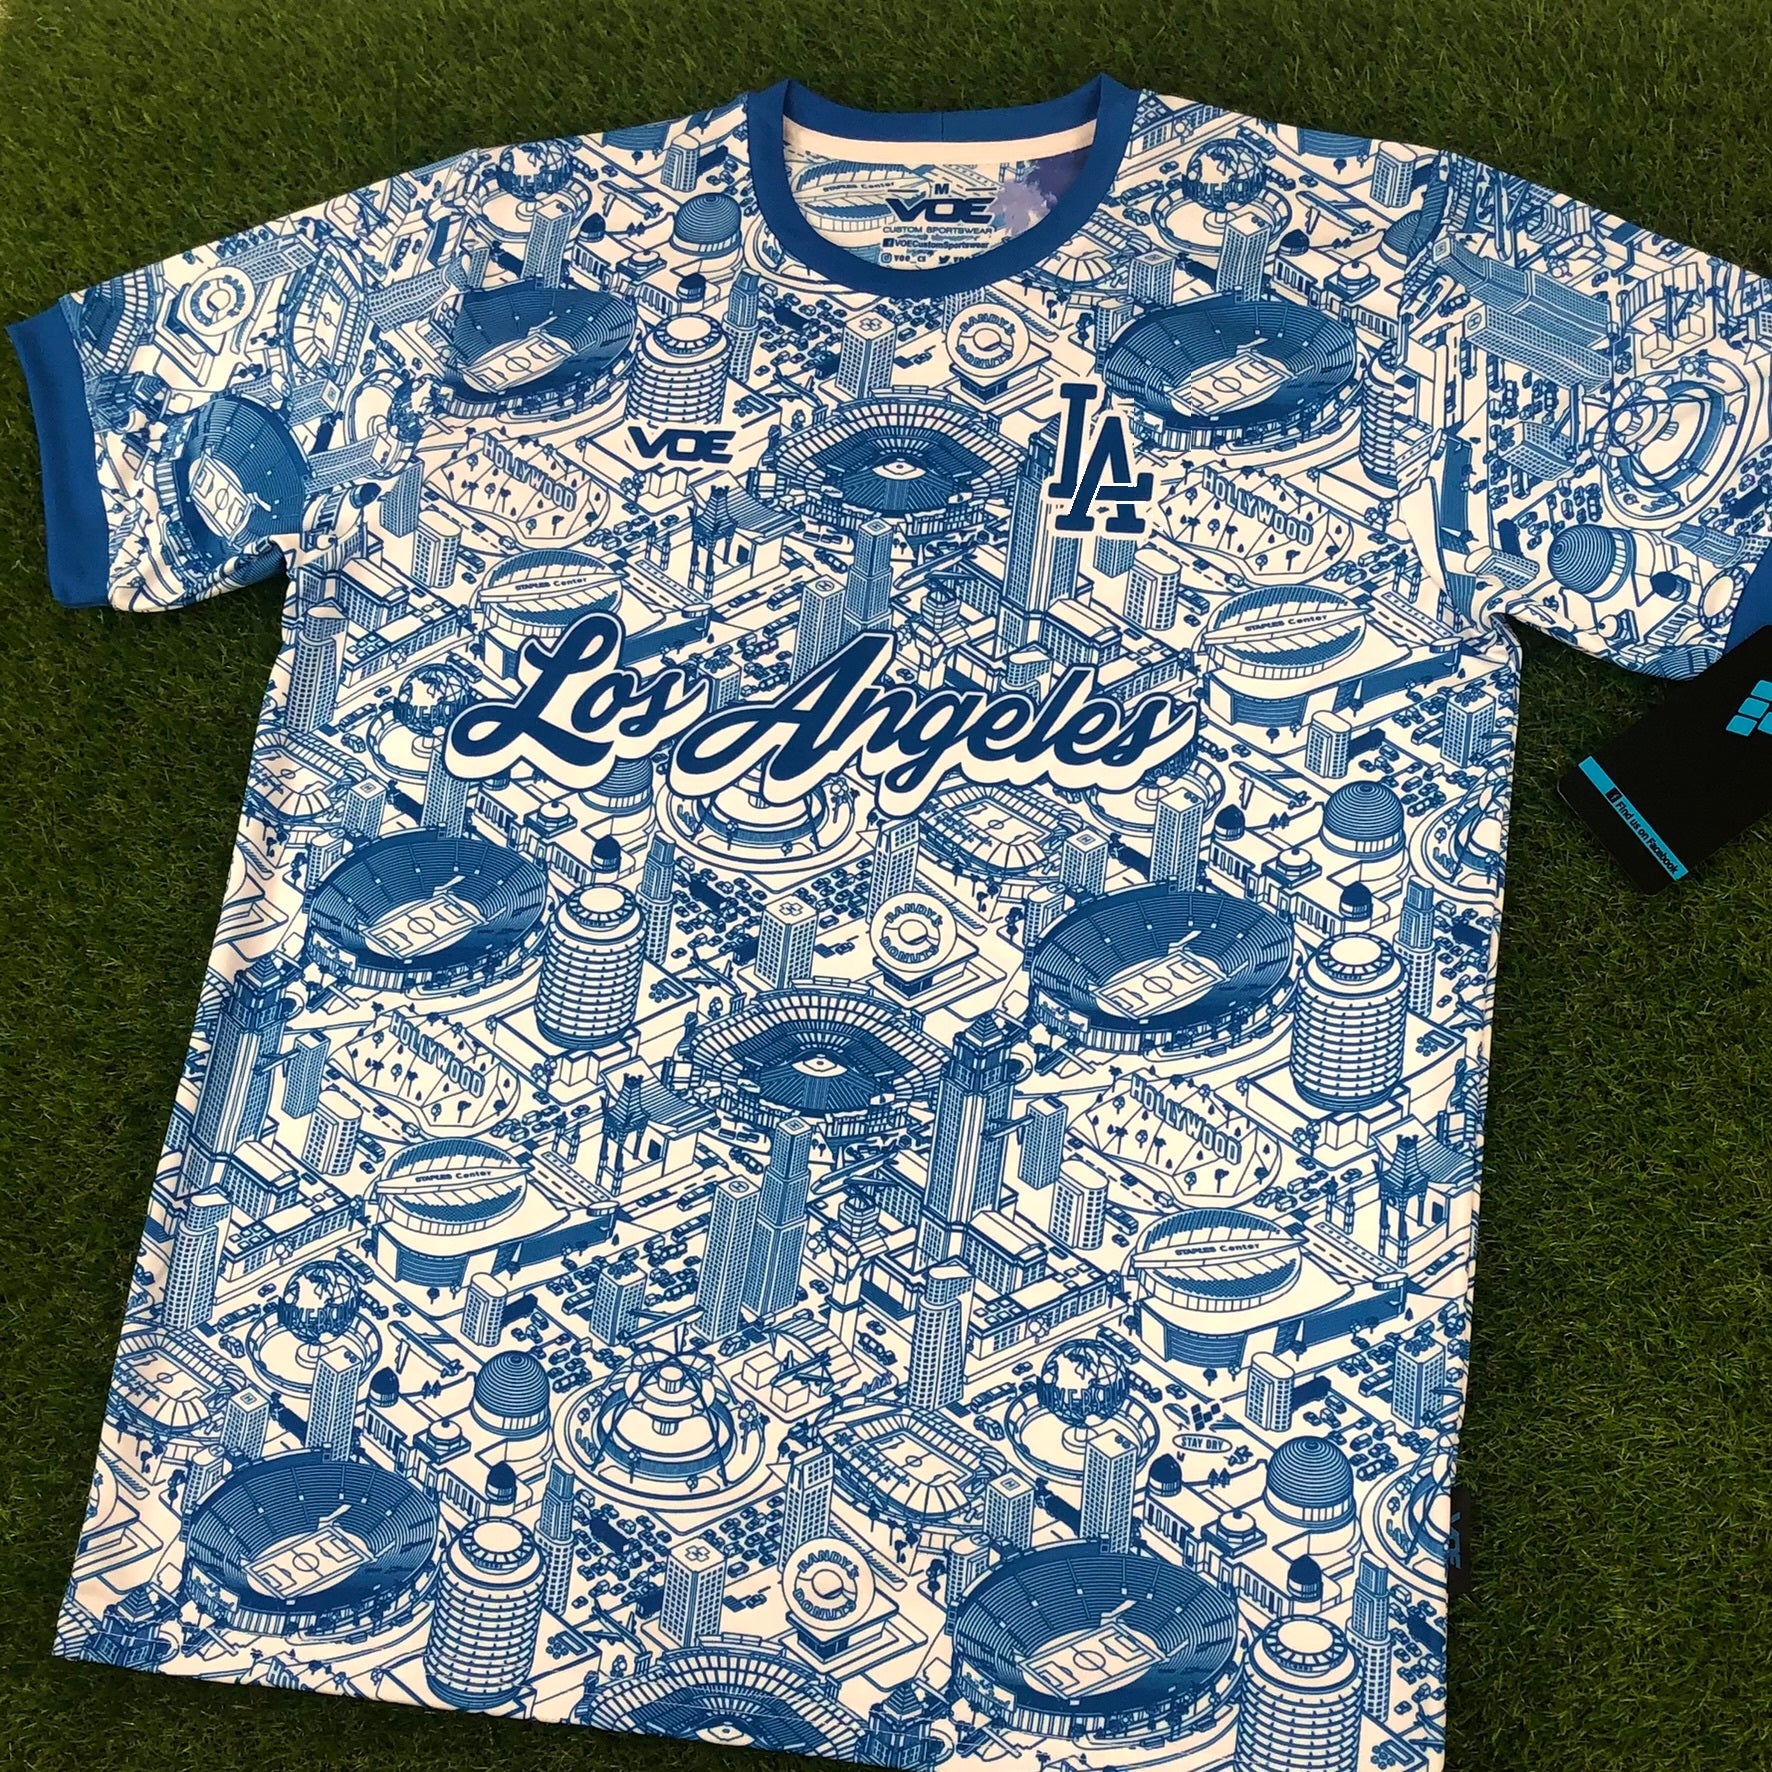 Custom Name Los Angeles Dodgers All Over Print Baseball Jersey S